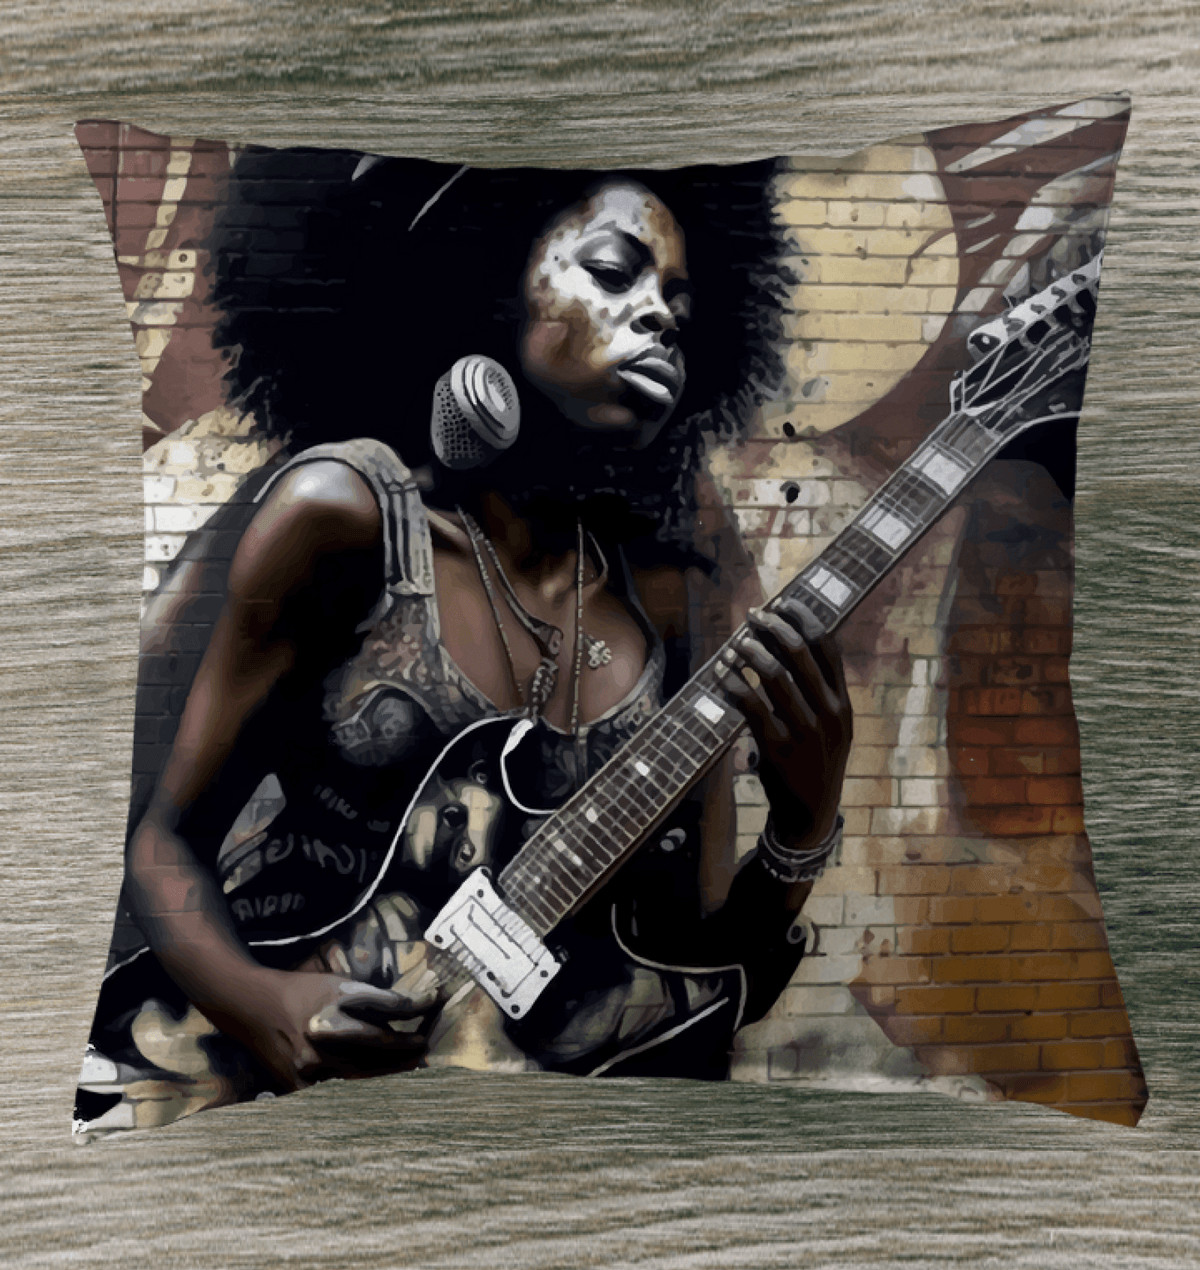 Strumming With Soul and Passion Outdoor Pillow - Beyond T-shirts